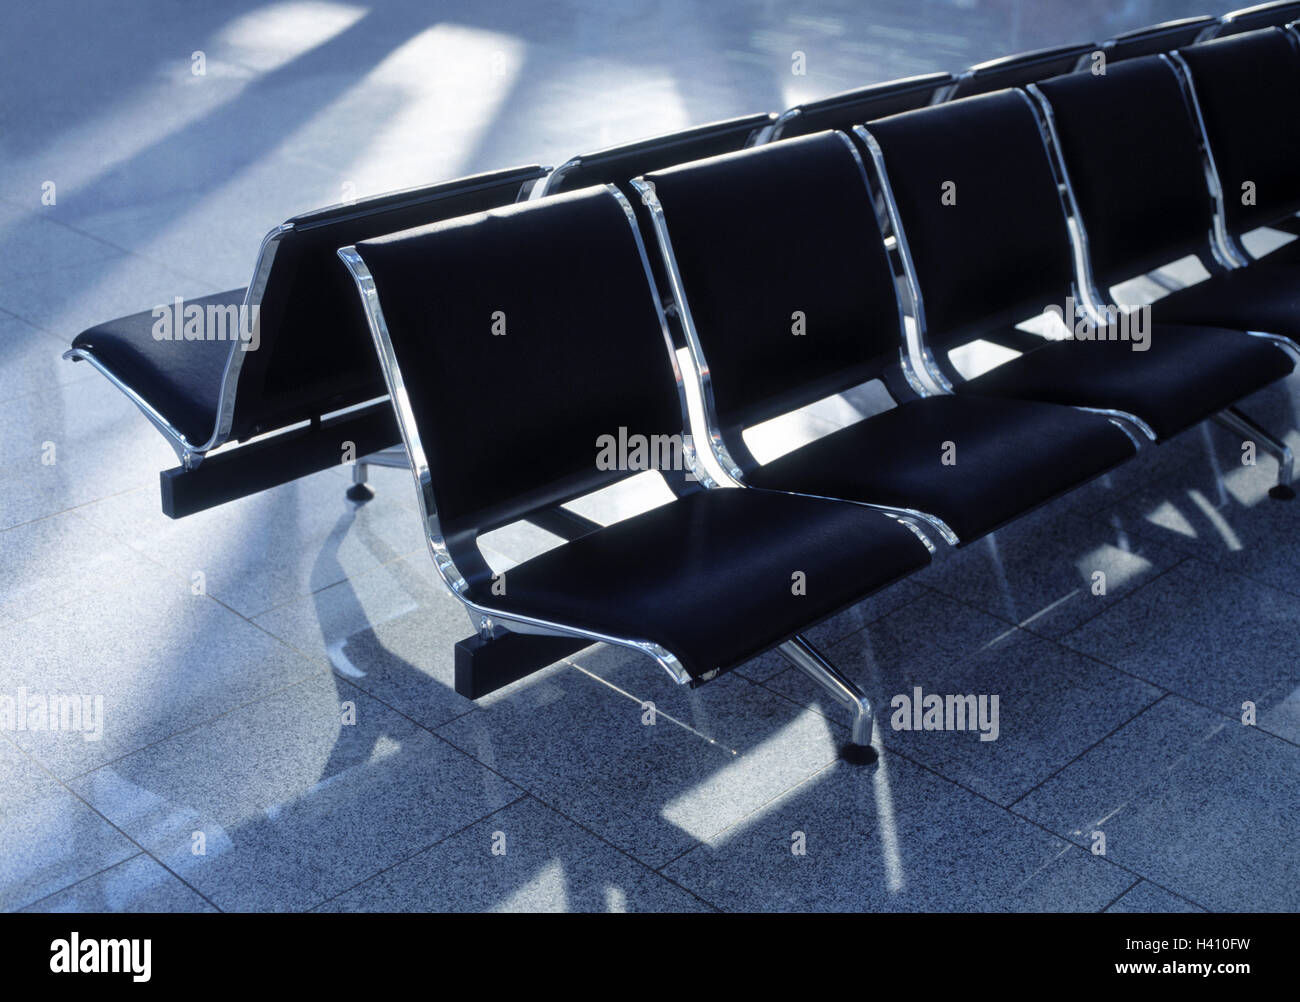 Waiting room, seats, detail, Flufhafen, air terminal, waiting zone, waiting room, waiting range, hall, wait, chairs, bank, seat group, seat opportunities, blank, exited, loneliness, deserted, tiled floor, cleanly, cleanness, order, tidily, waiting zone, p Stock Photo